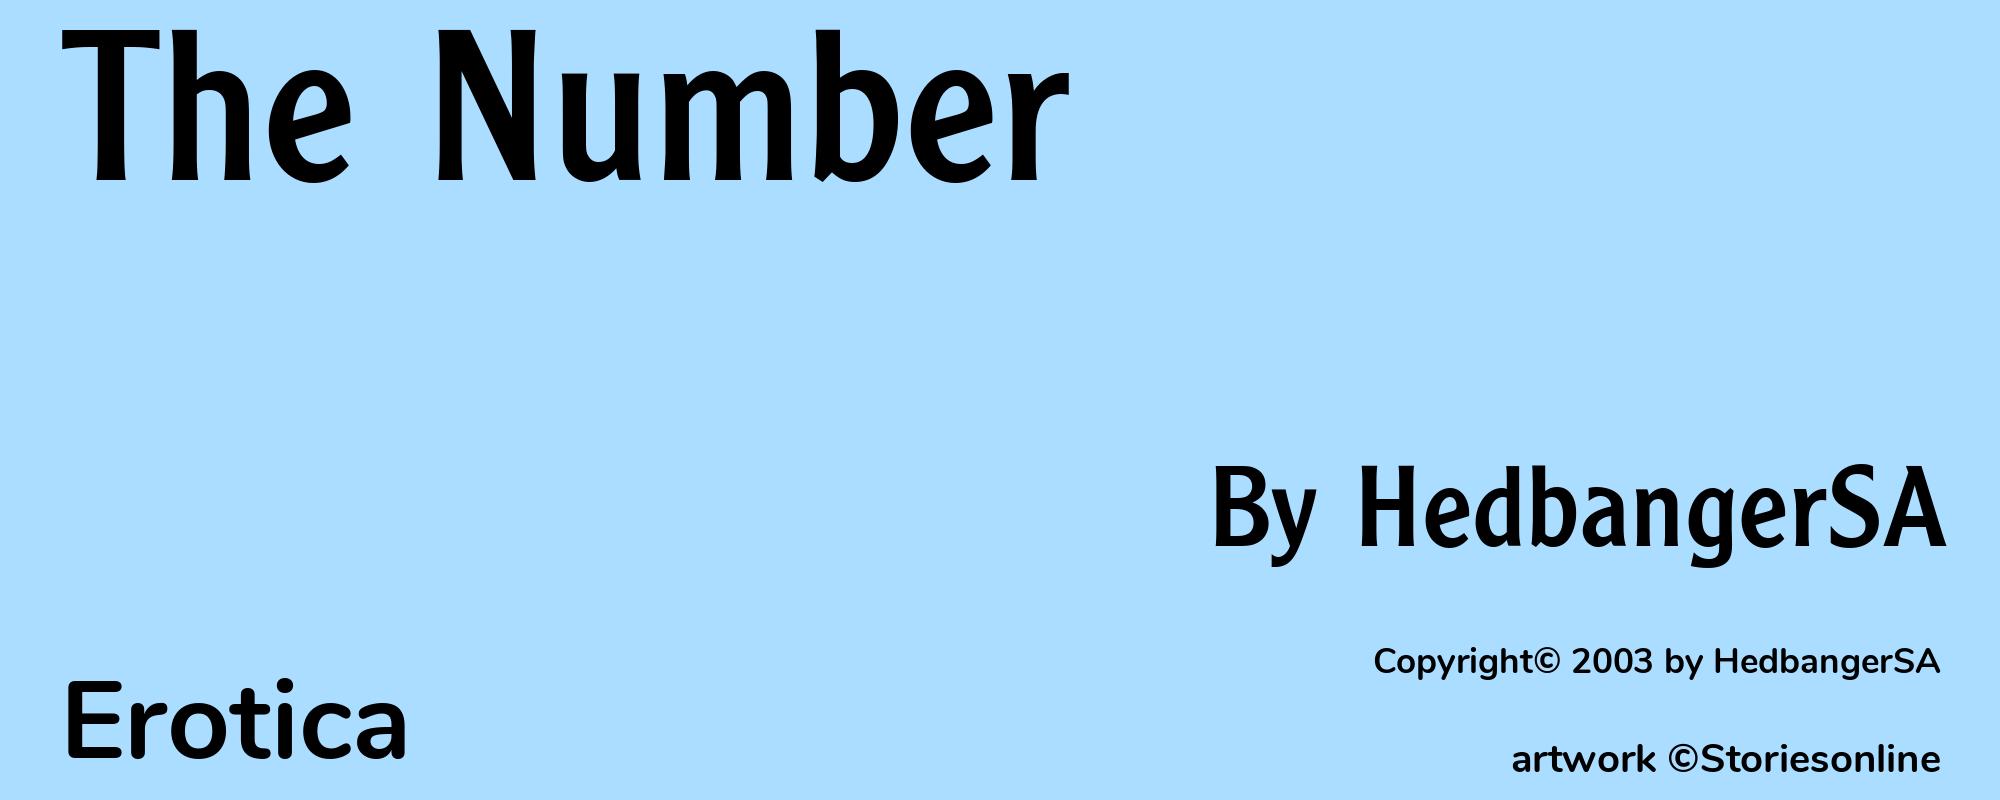 The Number - Cover